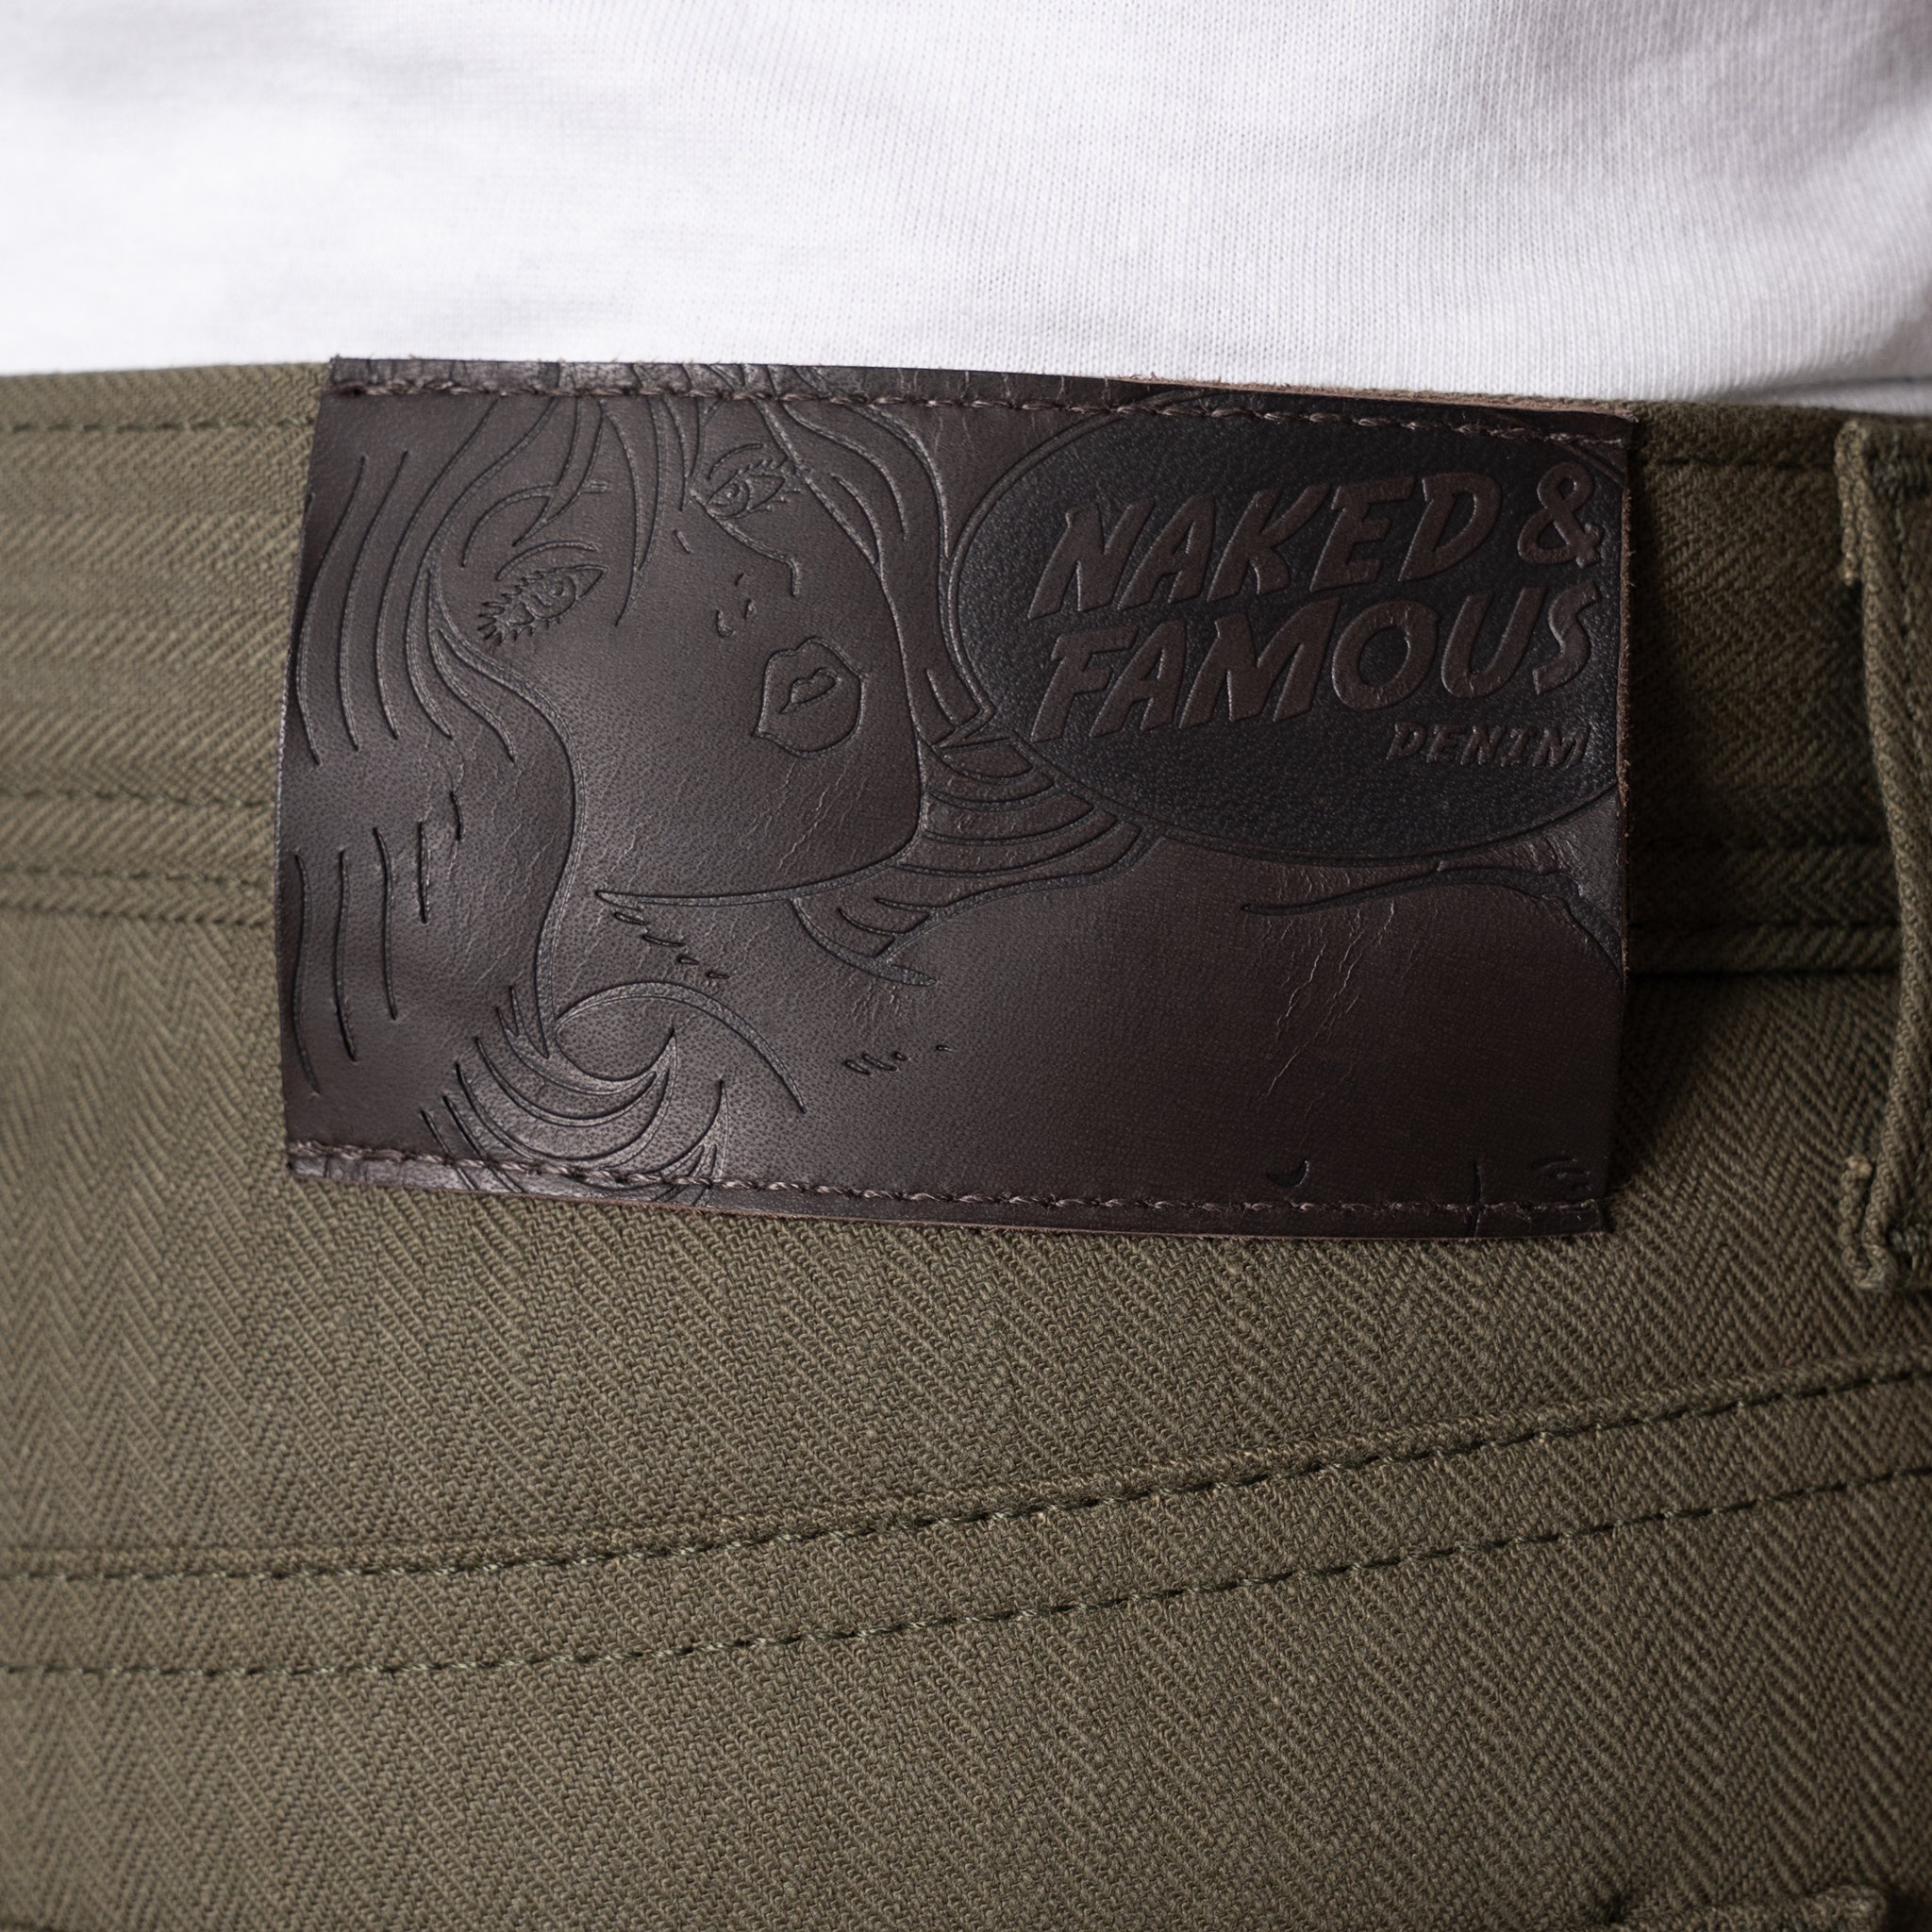 Army HBT - Olive Drab | Naked & Famous Denim